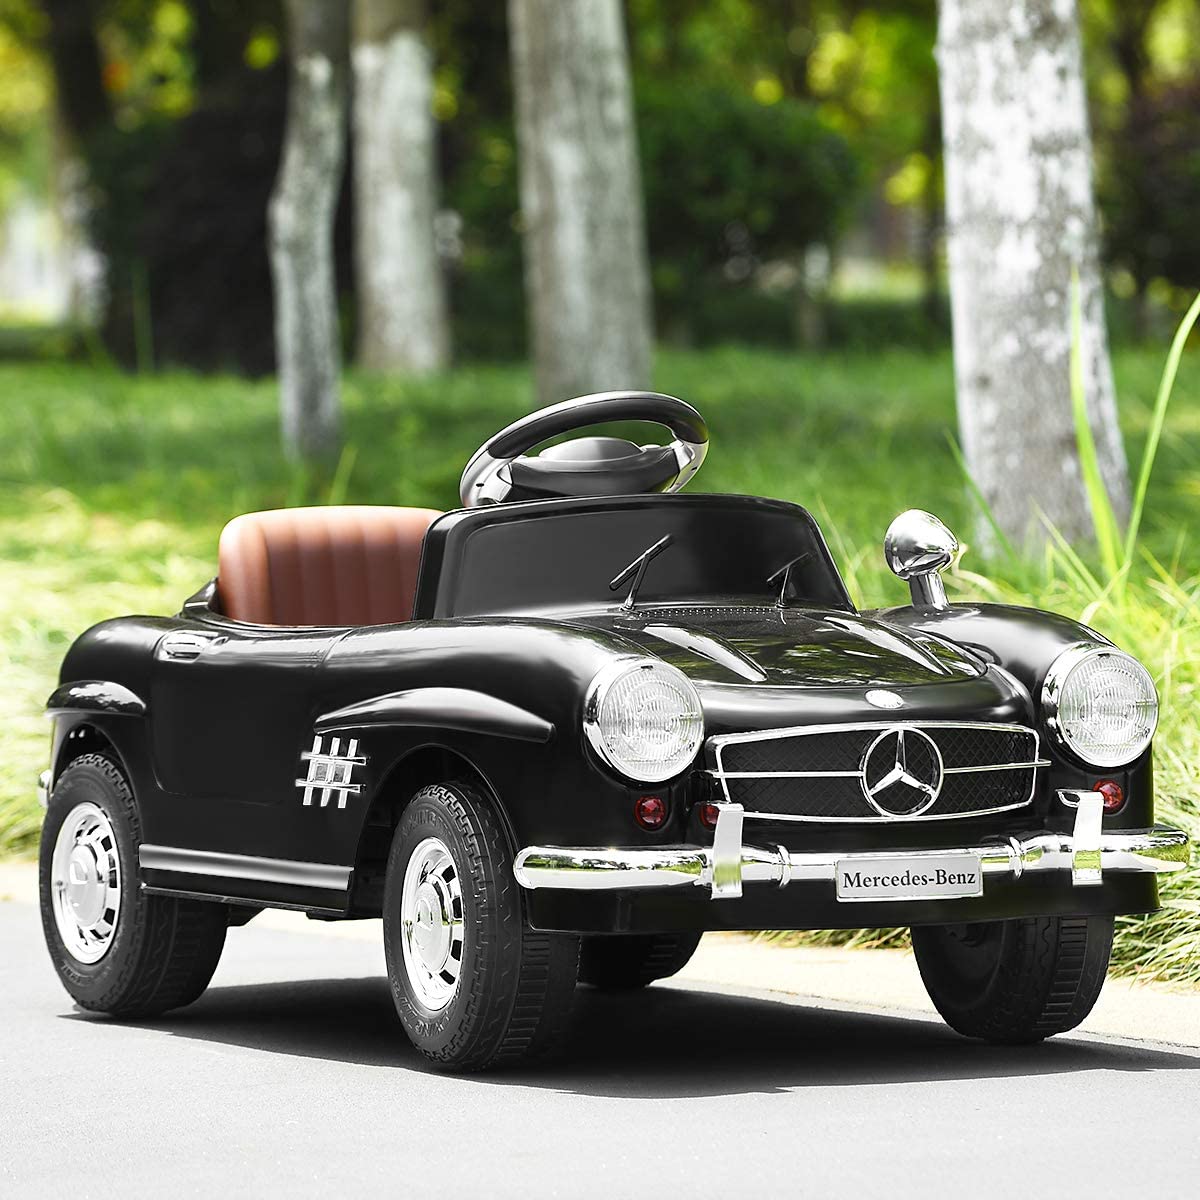 Chairliving 6V Kids Ride-On Car Battery Powered Licensed Mercedes Benz 300SL Electric Vehicle with Parent Remote Control Safety Belt